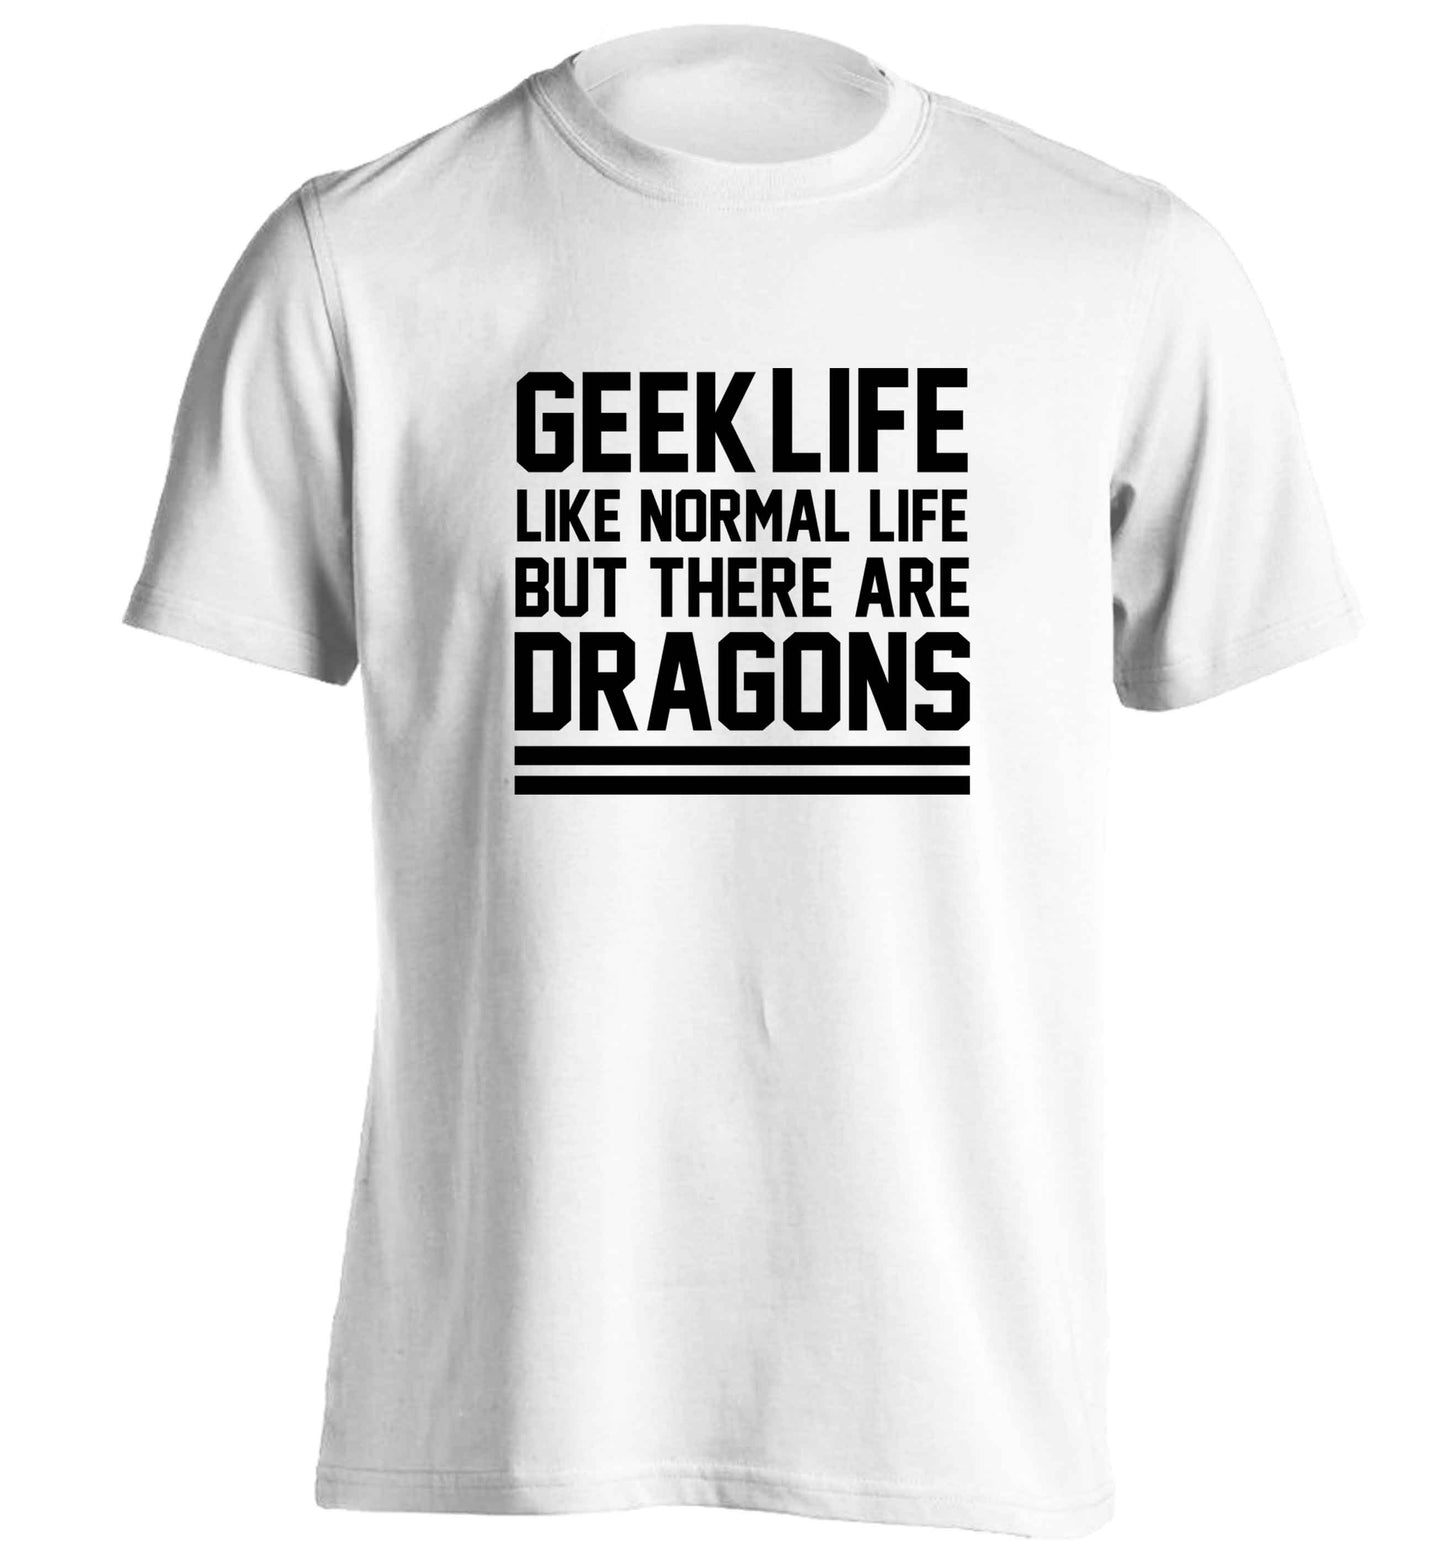 Geek life like normal life but there are dragons adults unisex white Tshirt 2XL